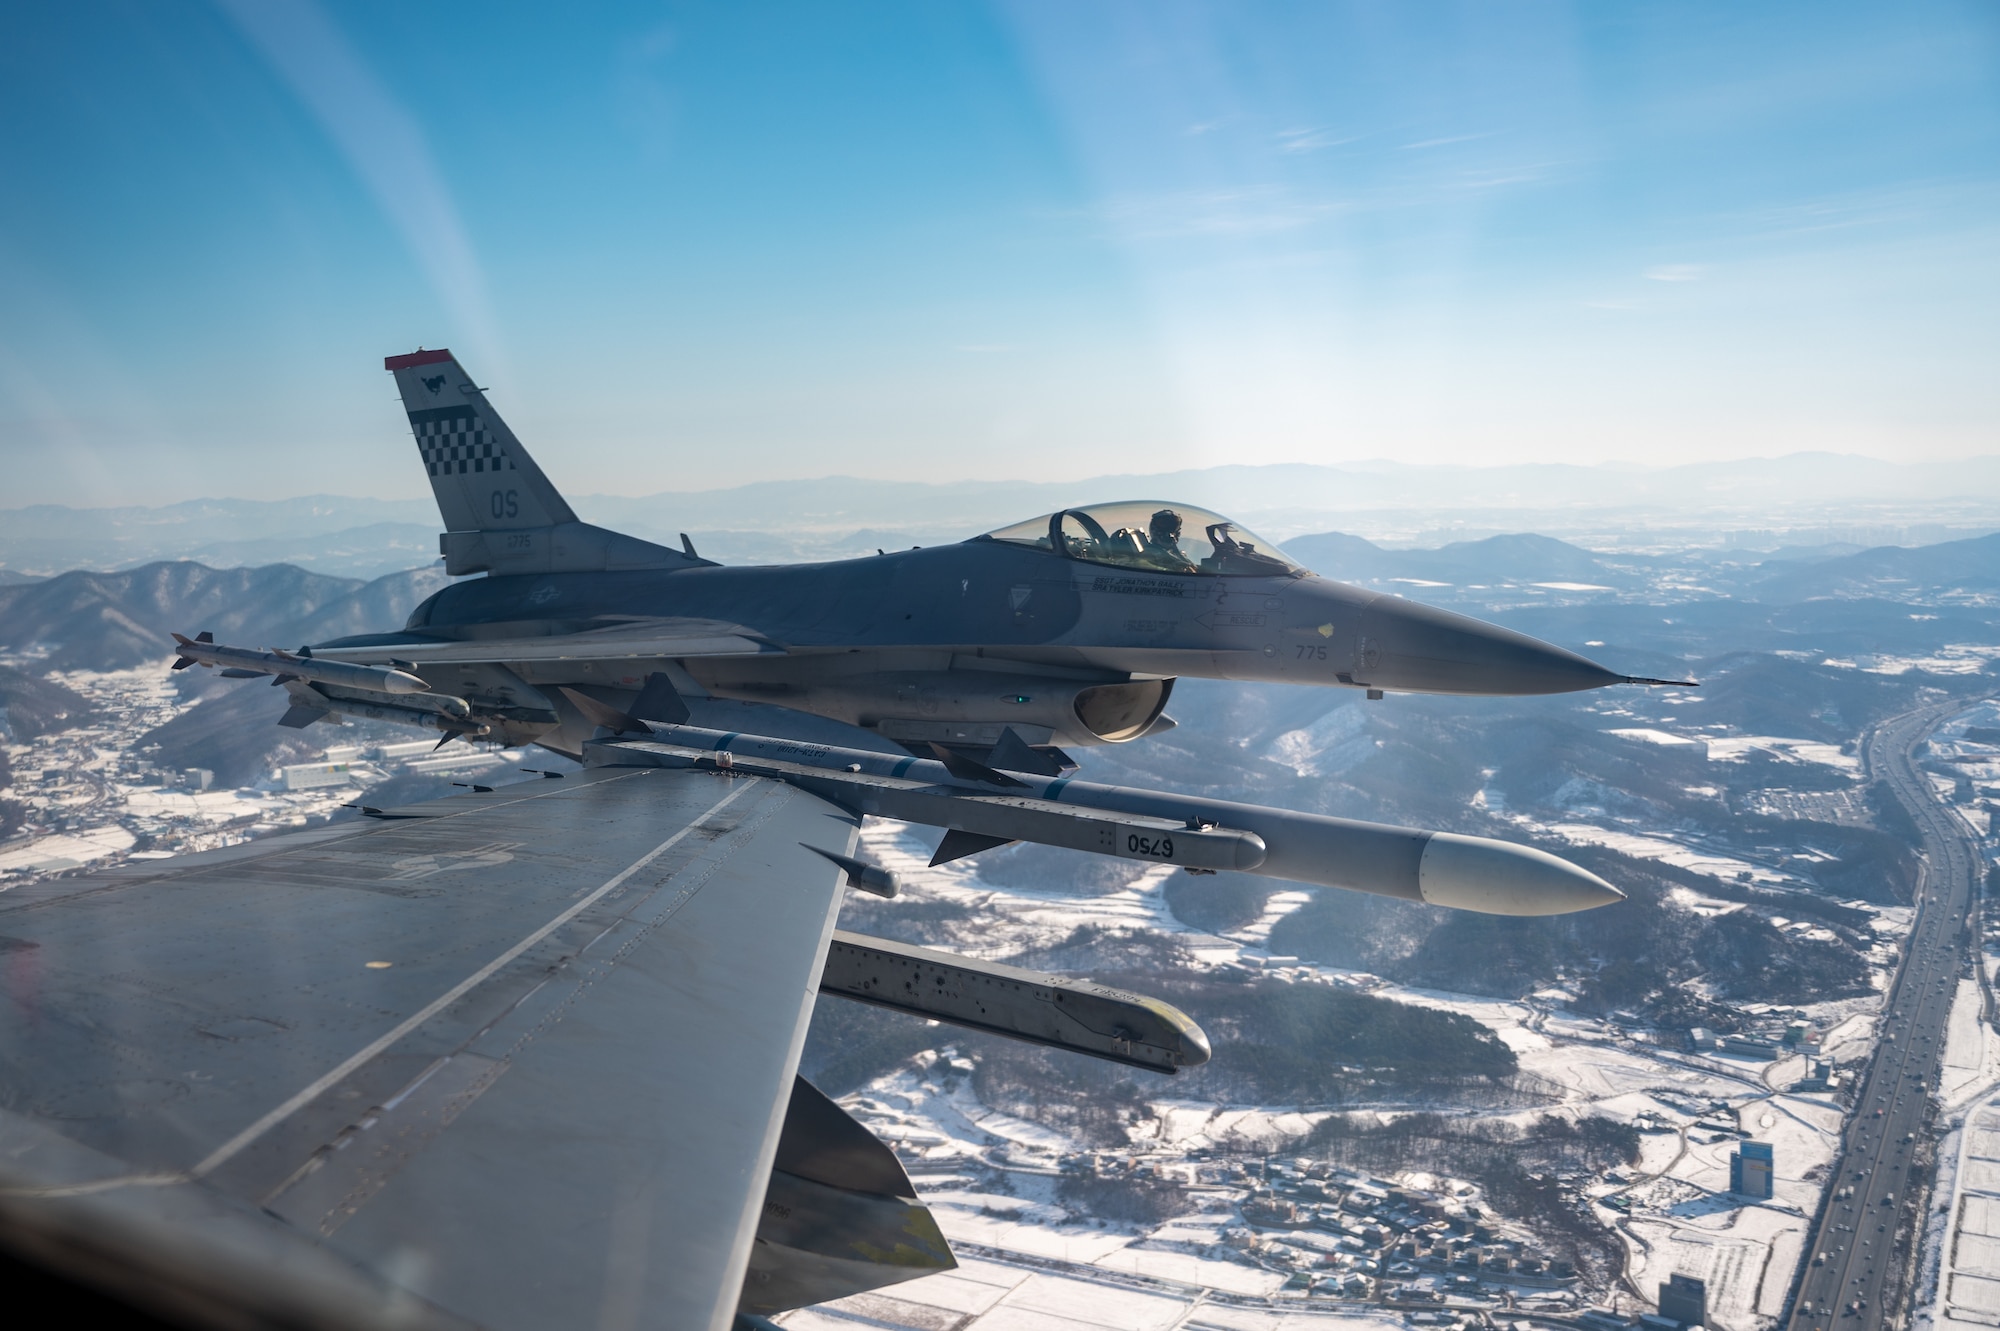 U.S. Air Force F-16 Fighting Falcons assigned to the 36th Fighter Squadron fly in formation while conducting close air support (CAS) training over Gyeonggi-do, Republic of Korea, Dec. 20, 2022.